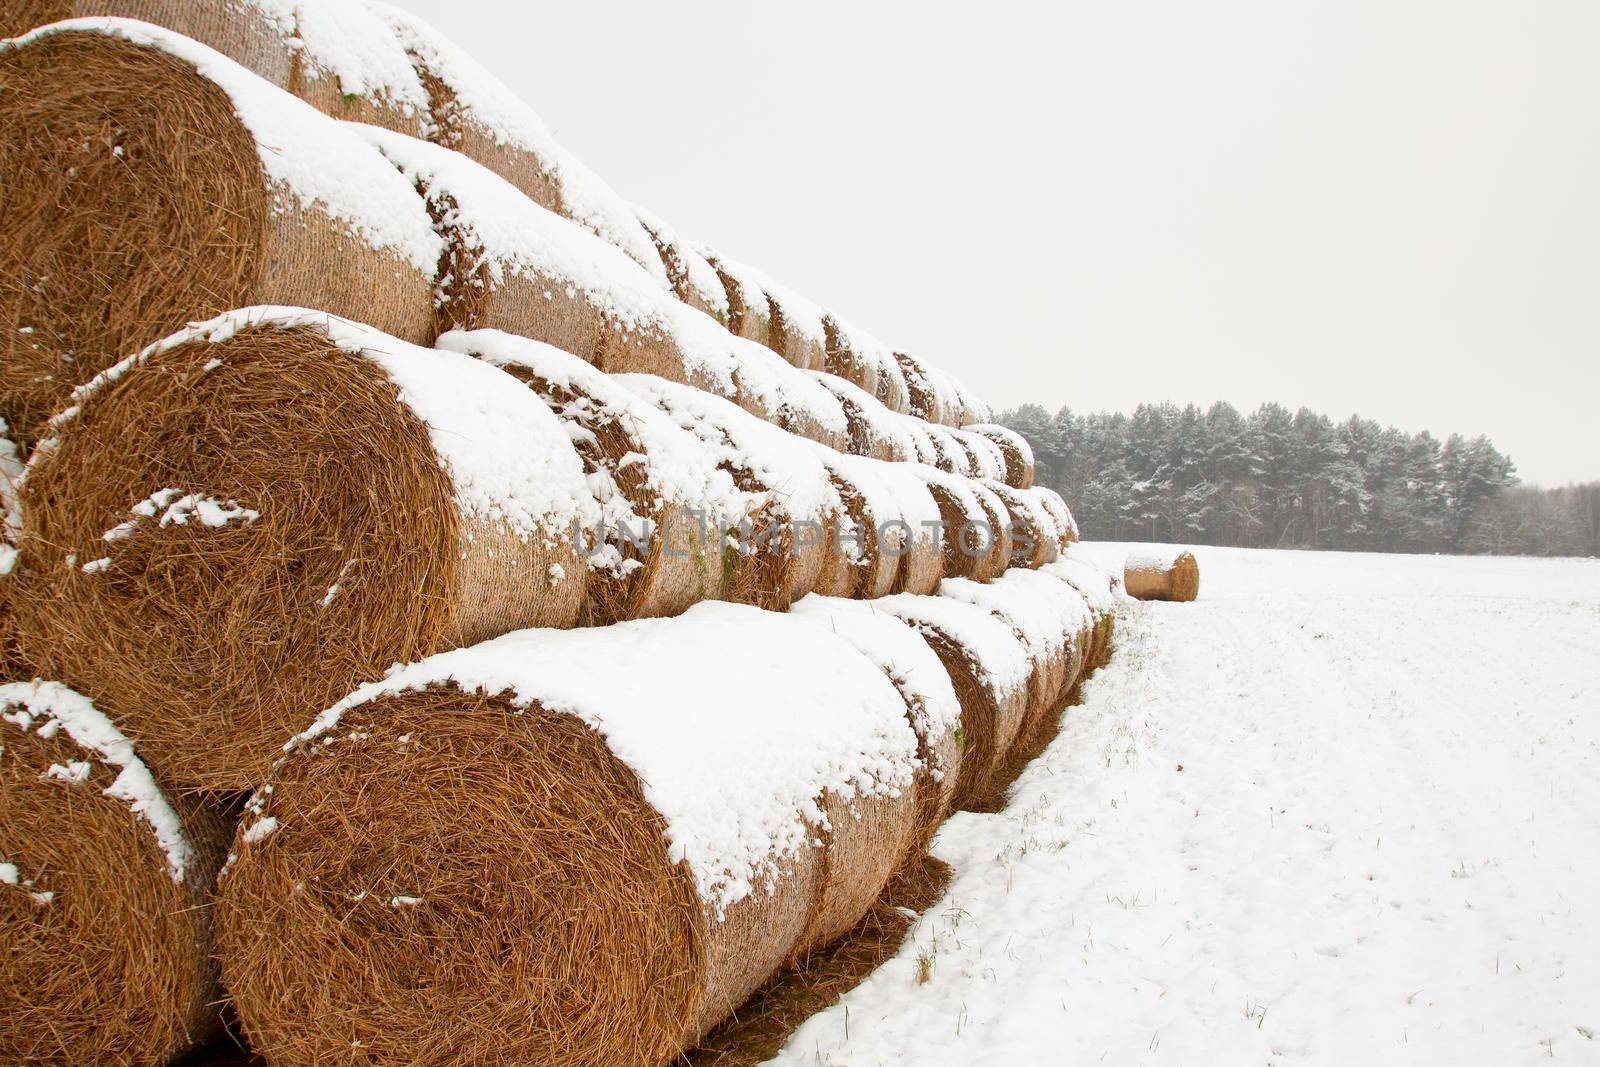 Straw Fodder Bales in Winter by BY-_-BY